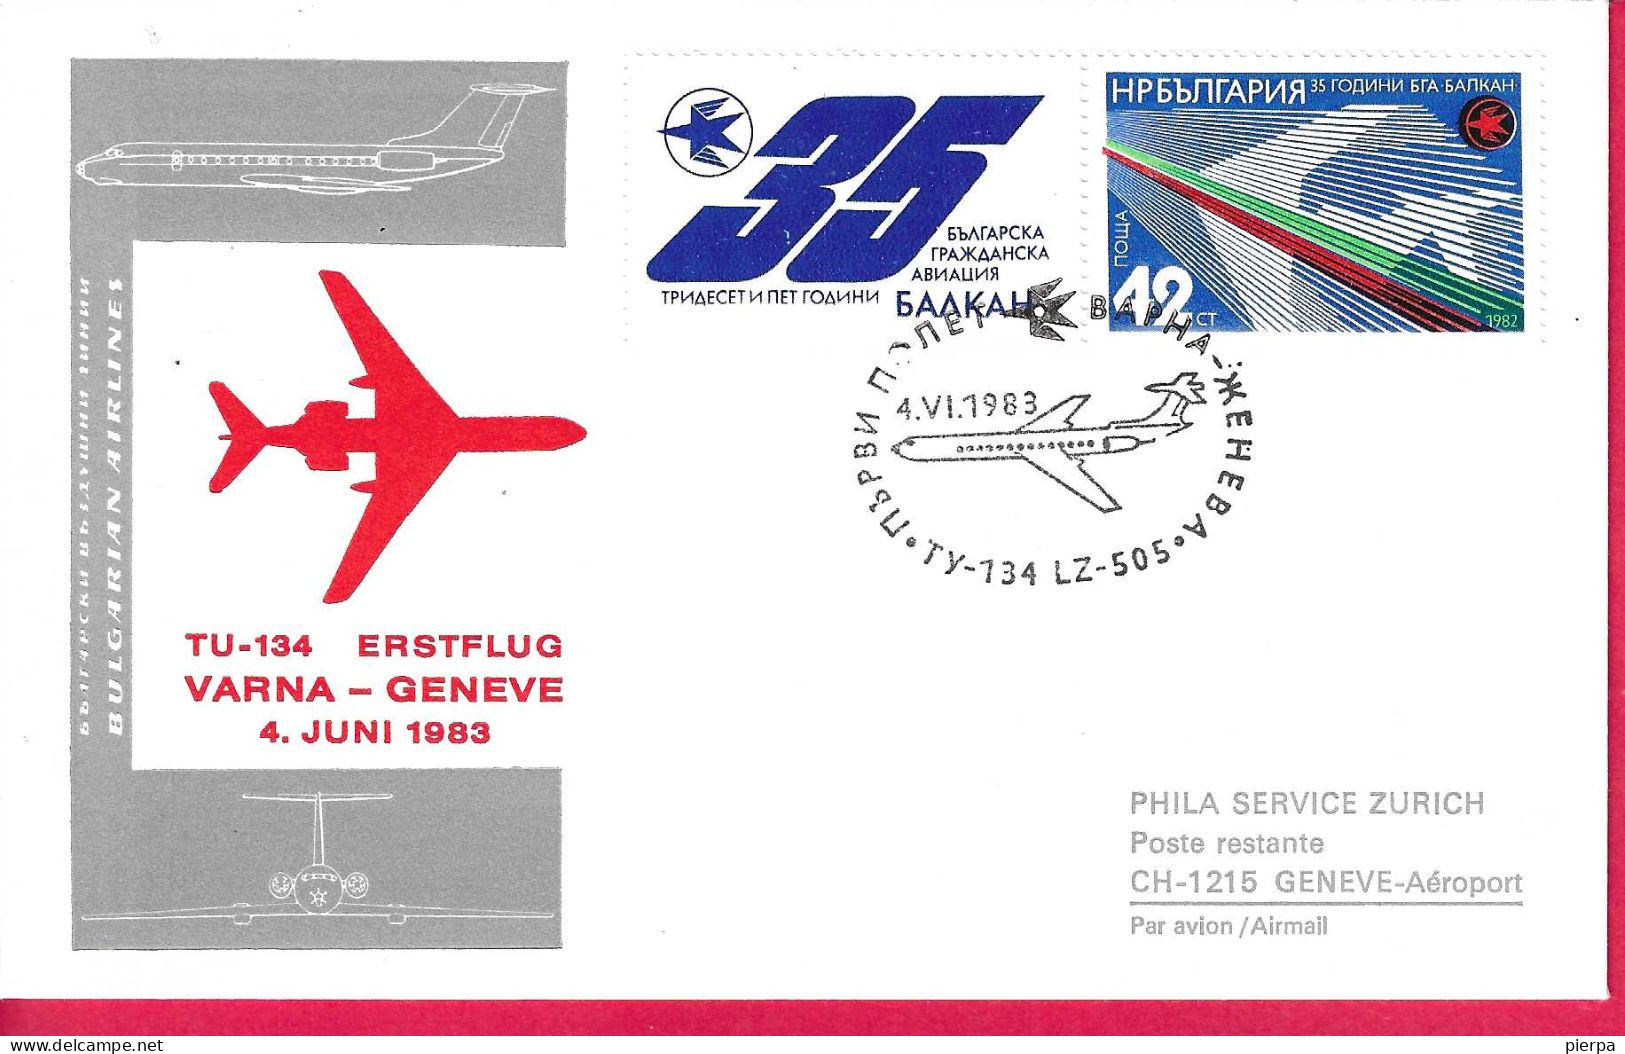 BULGARIA - FIRST FLIGHT TU-134 FROM VARNA TO GENEVE * 4.VI.1983* ON OFFICIAL COVER - Poste Aérienne